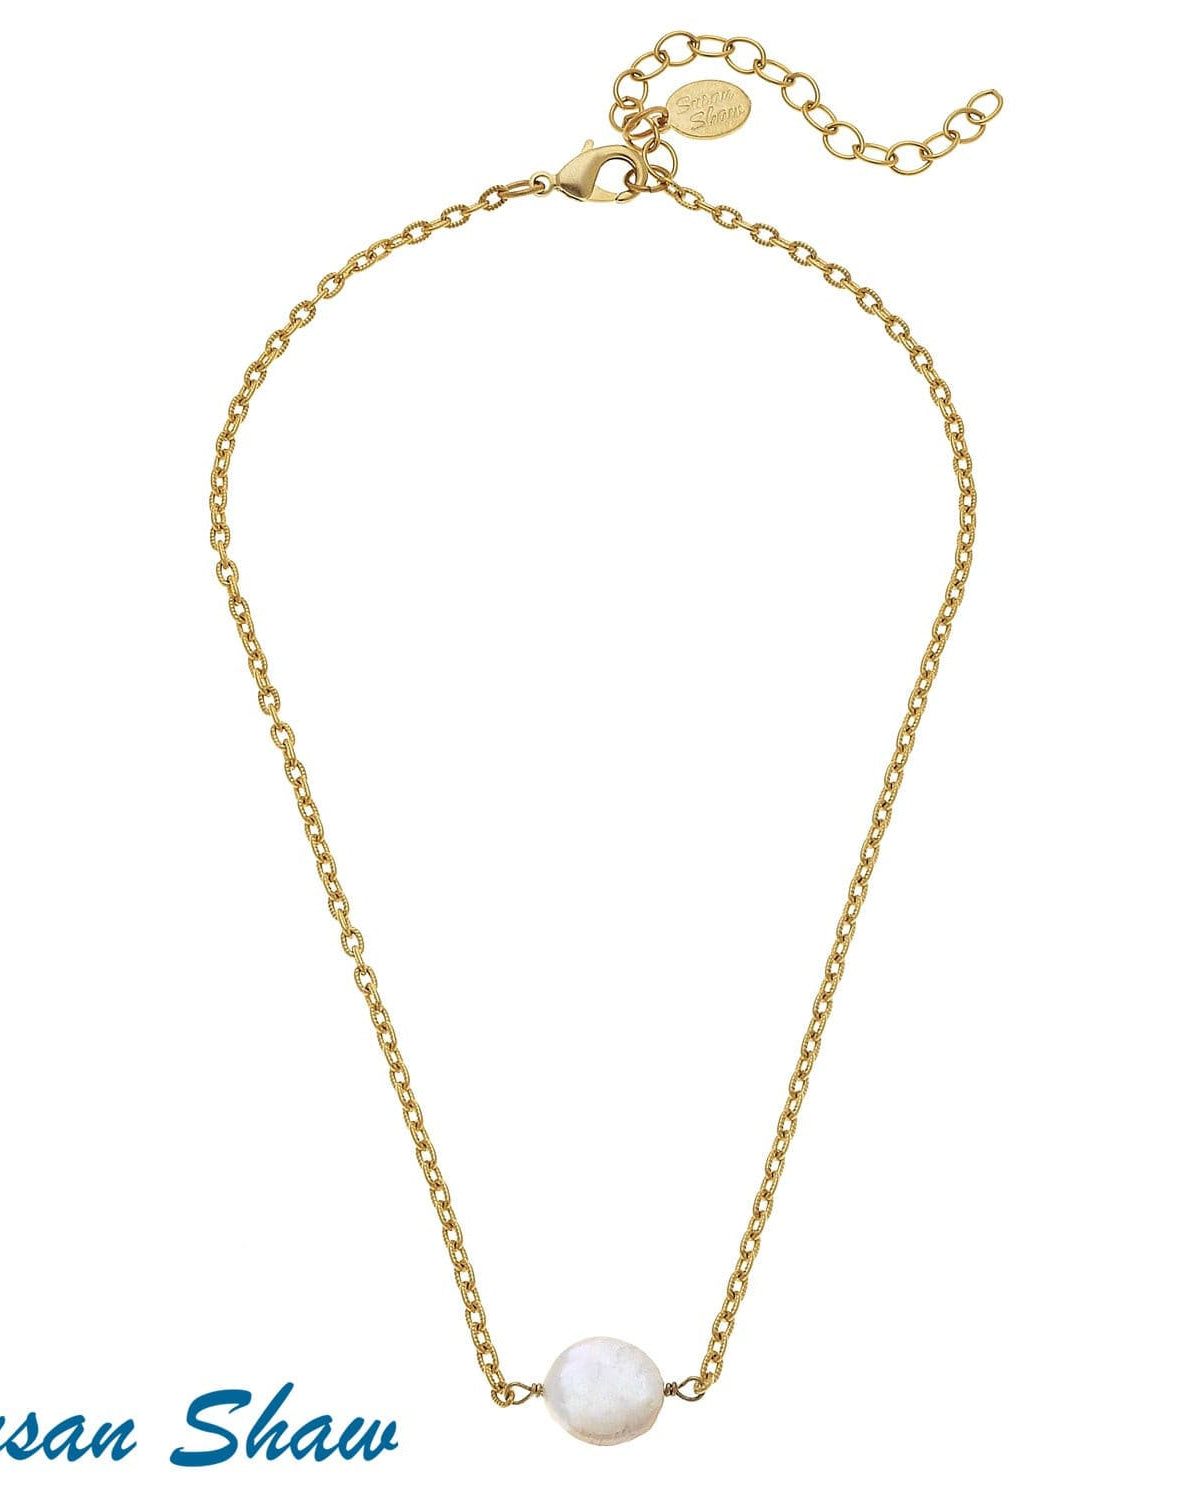 Susan Shaw Delicate Coin Pearl Necklace.